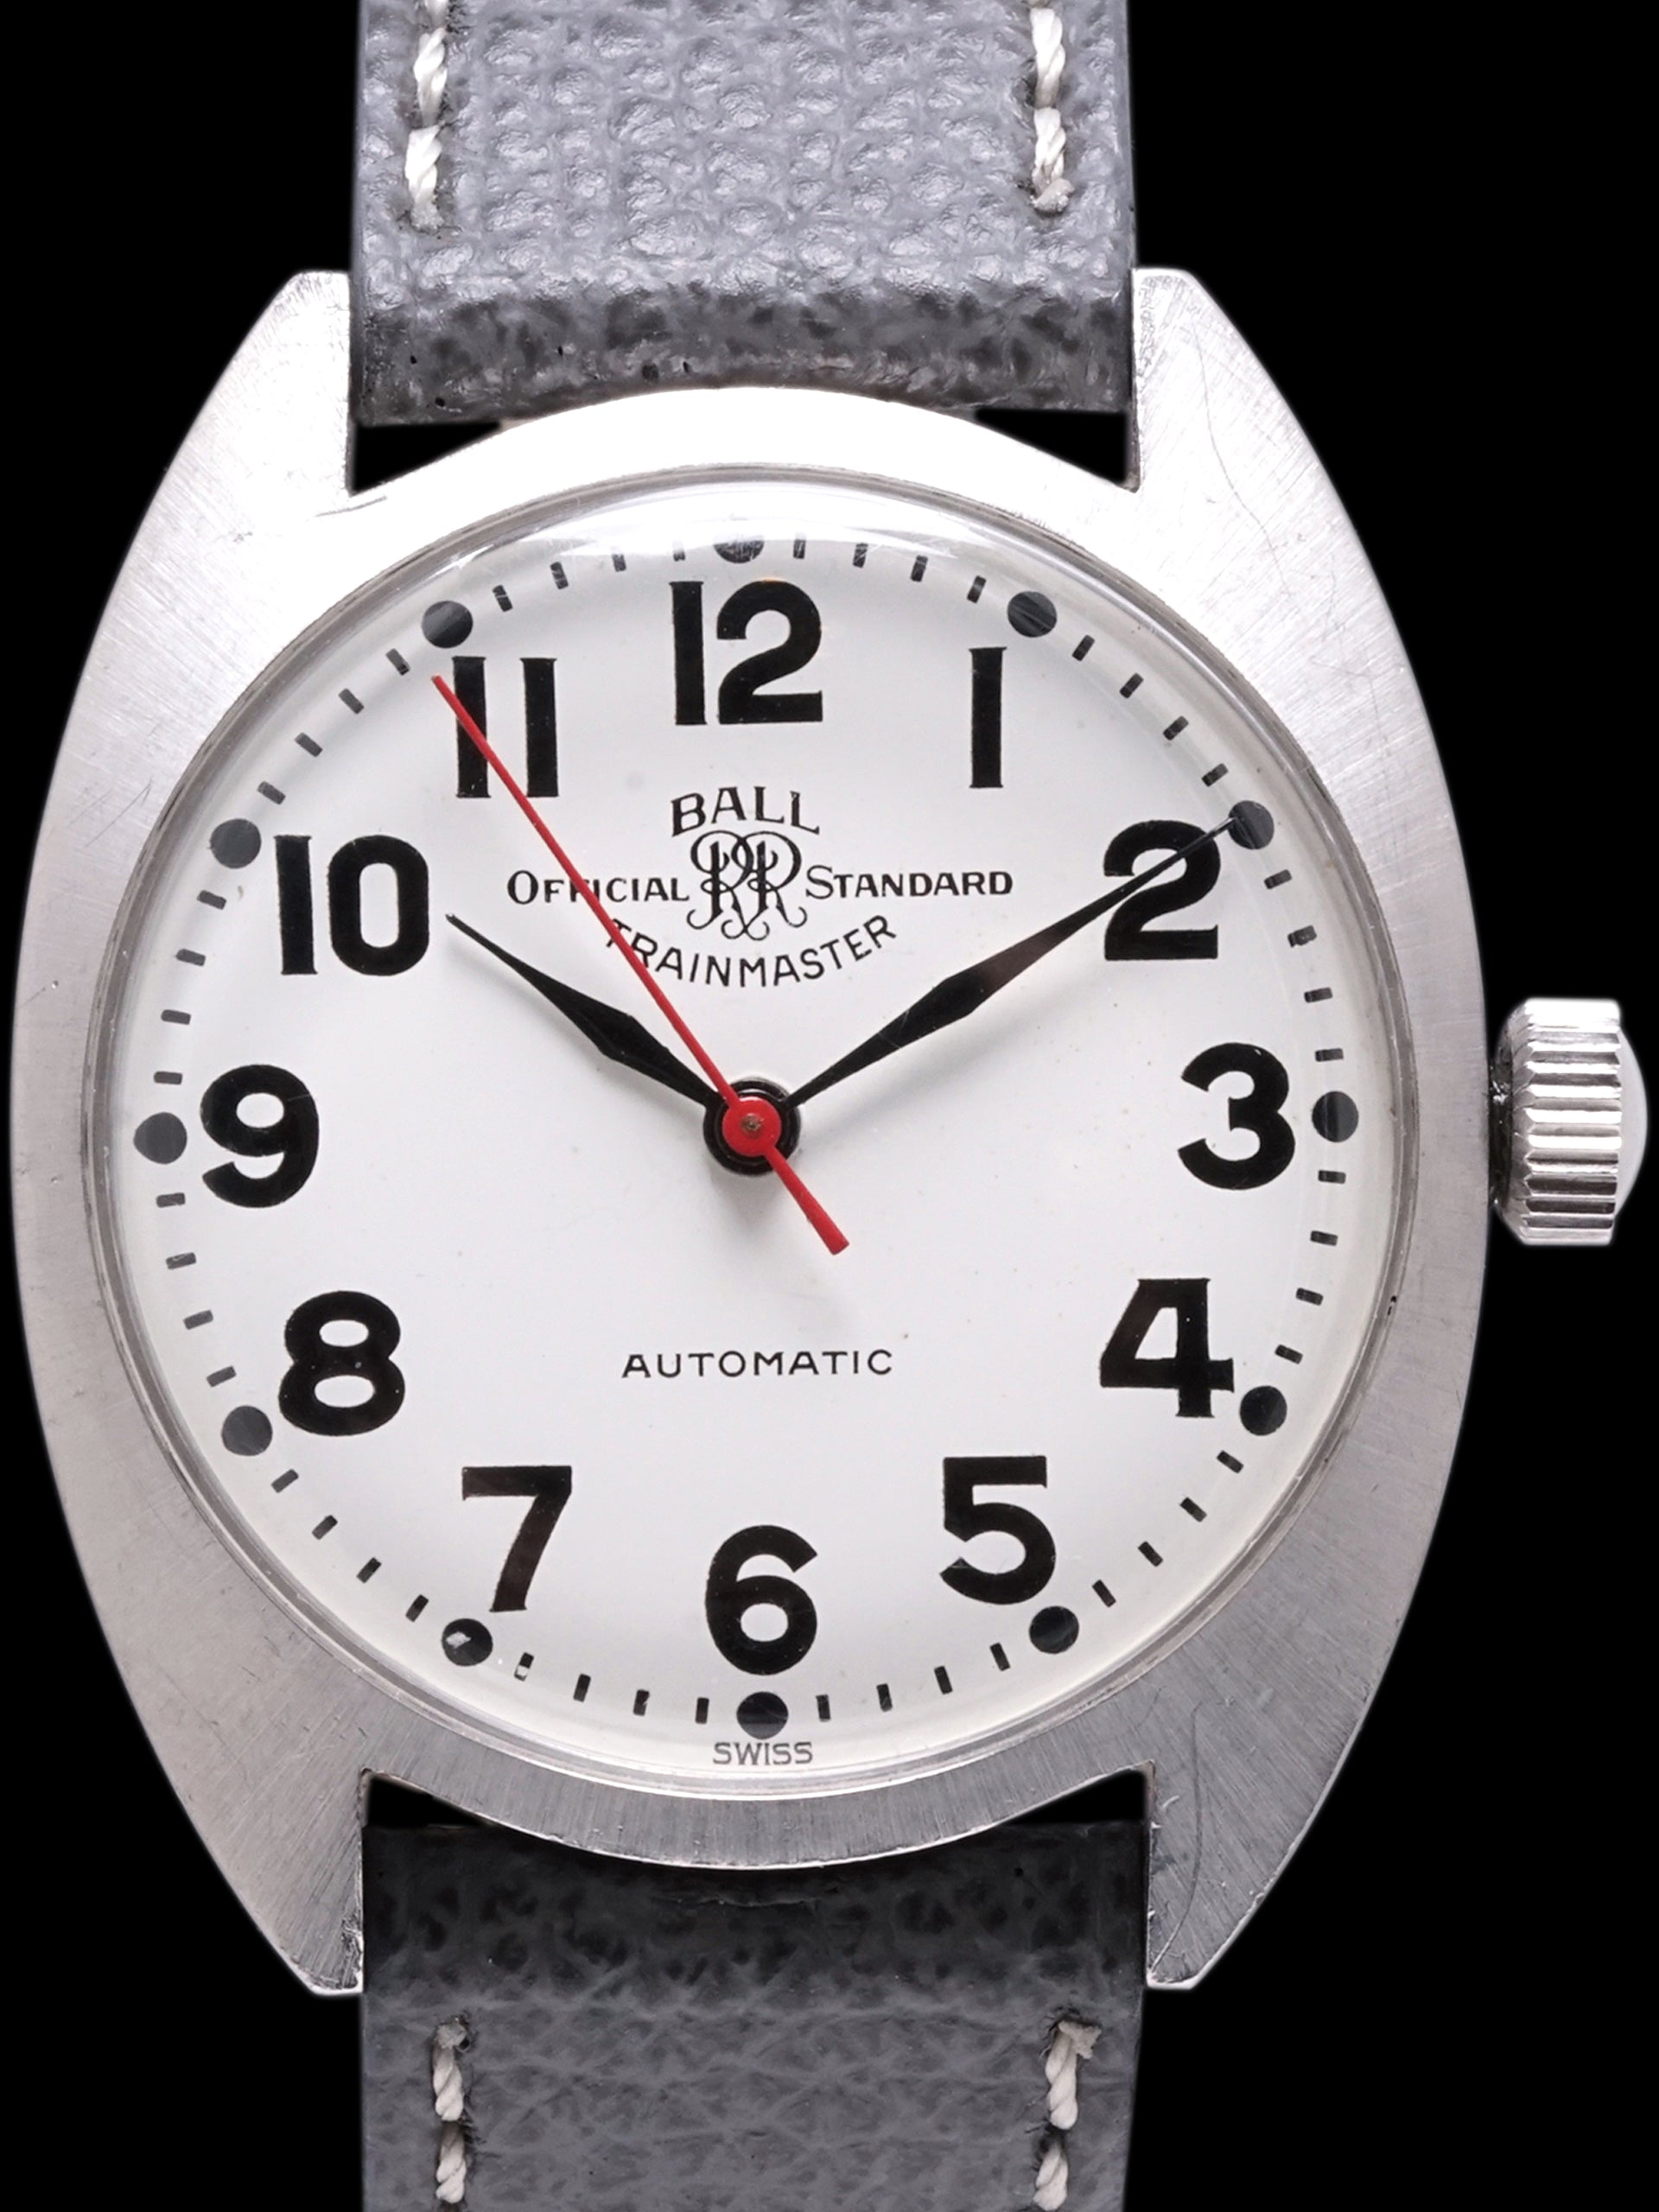 Ball Trainmaster Automatic Ref. 2822